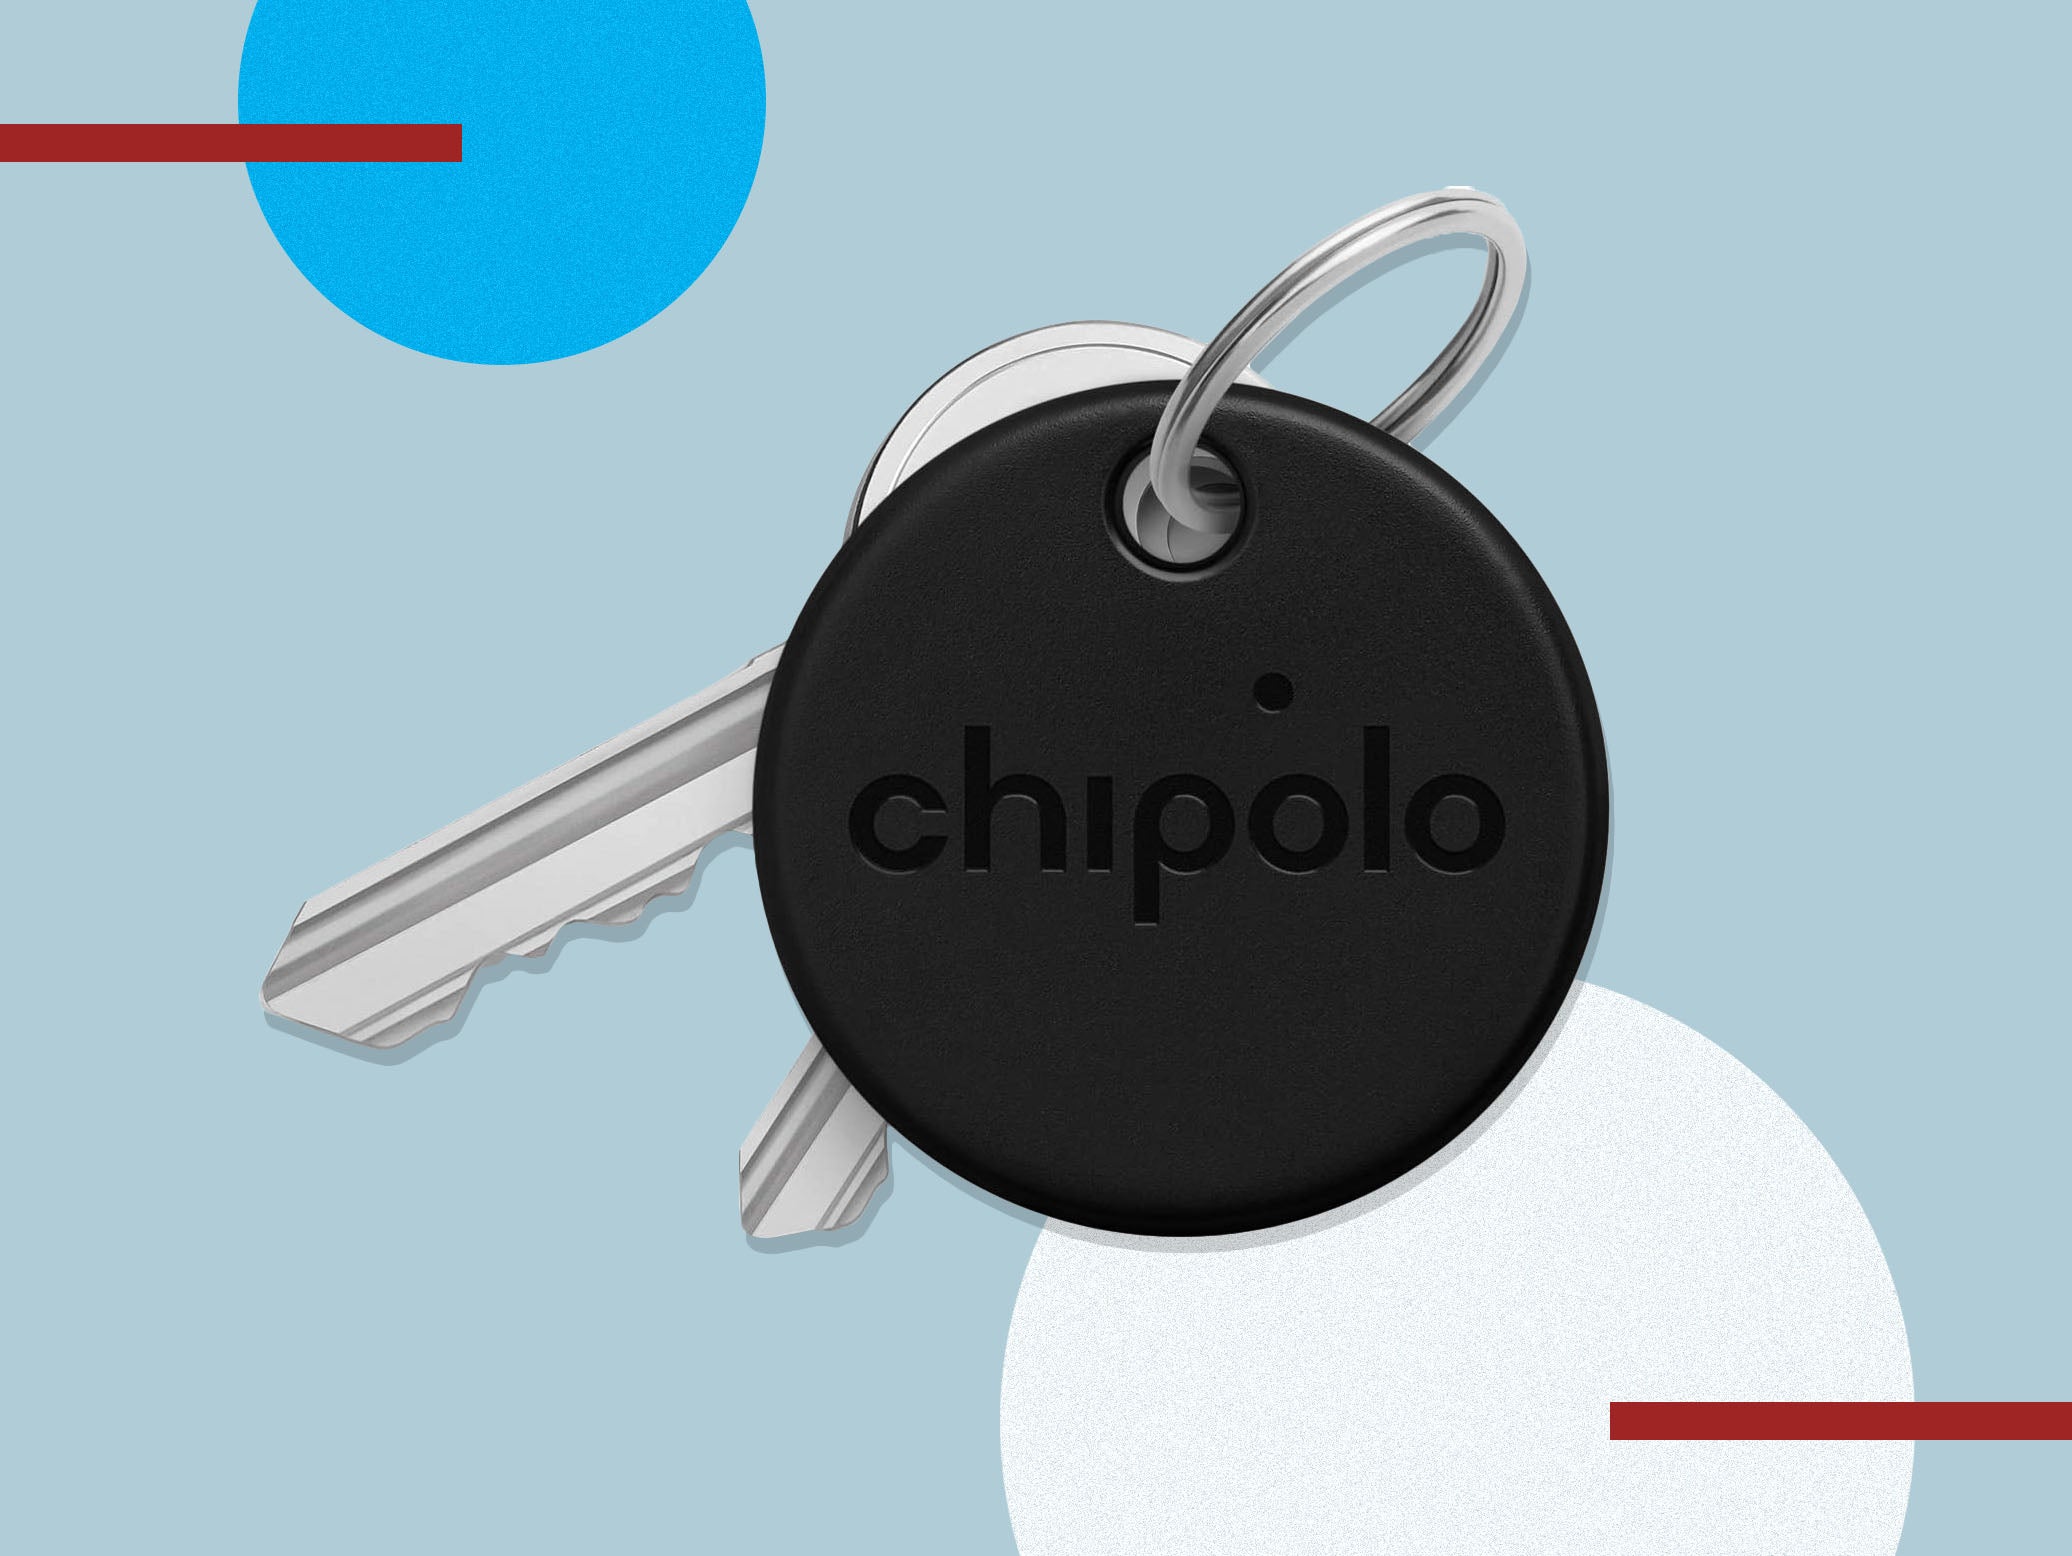  Key Finder, Bluetooth Tracker Locator Pairs with Apple